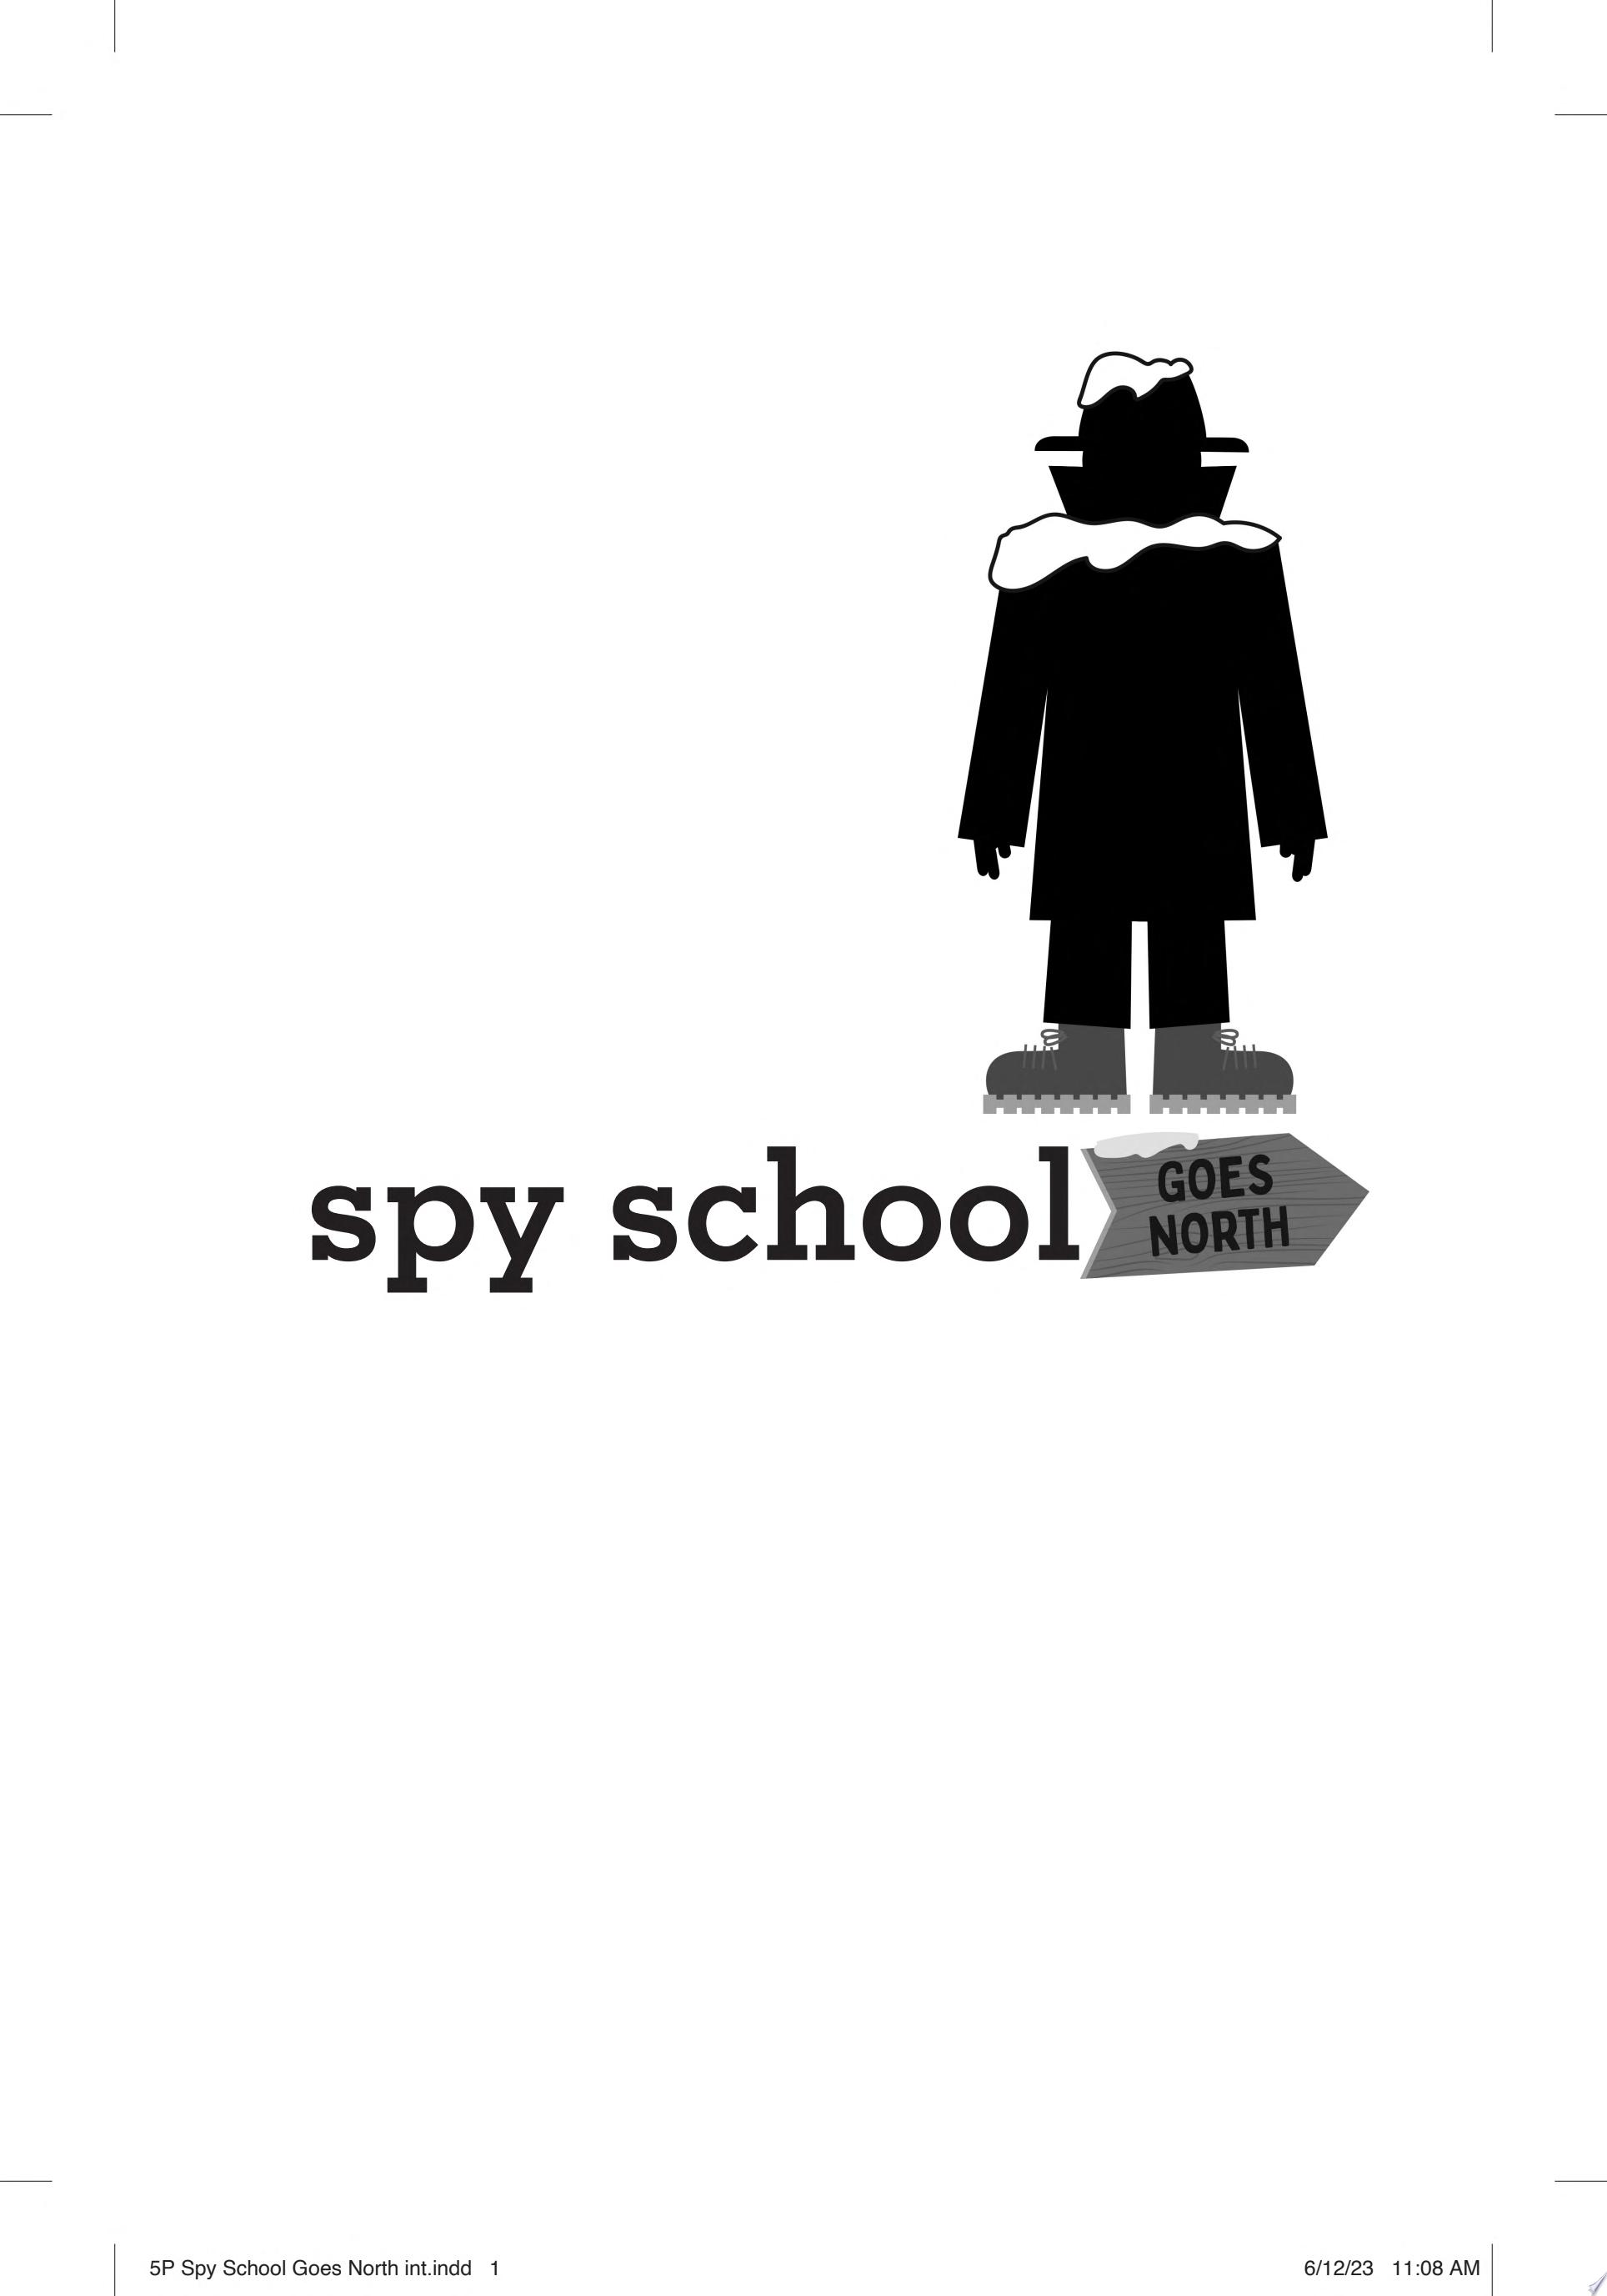 Image for "Spy School Goes North"